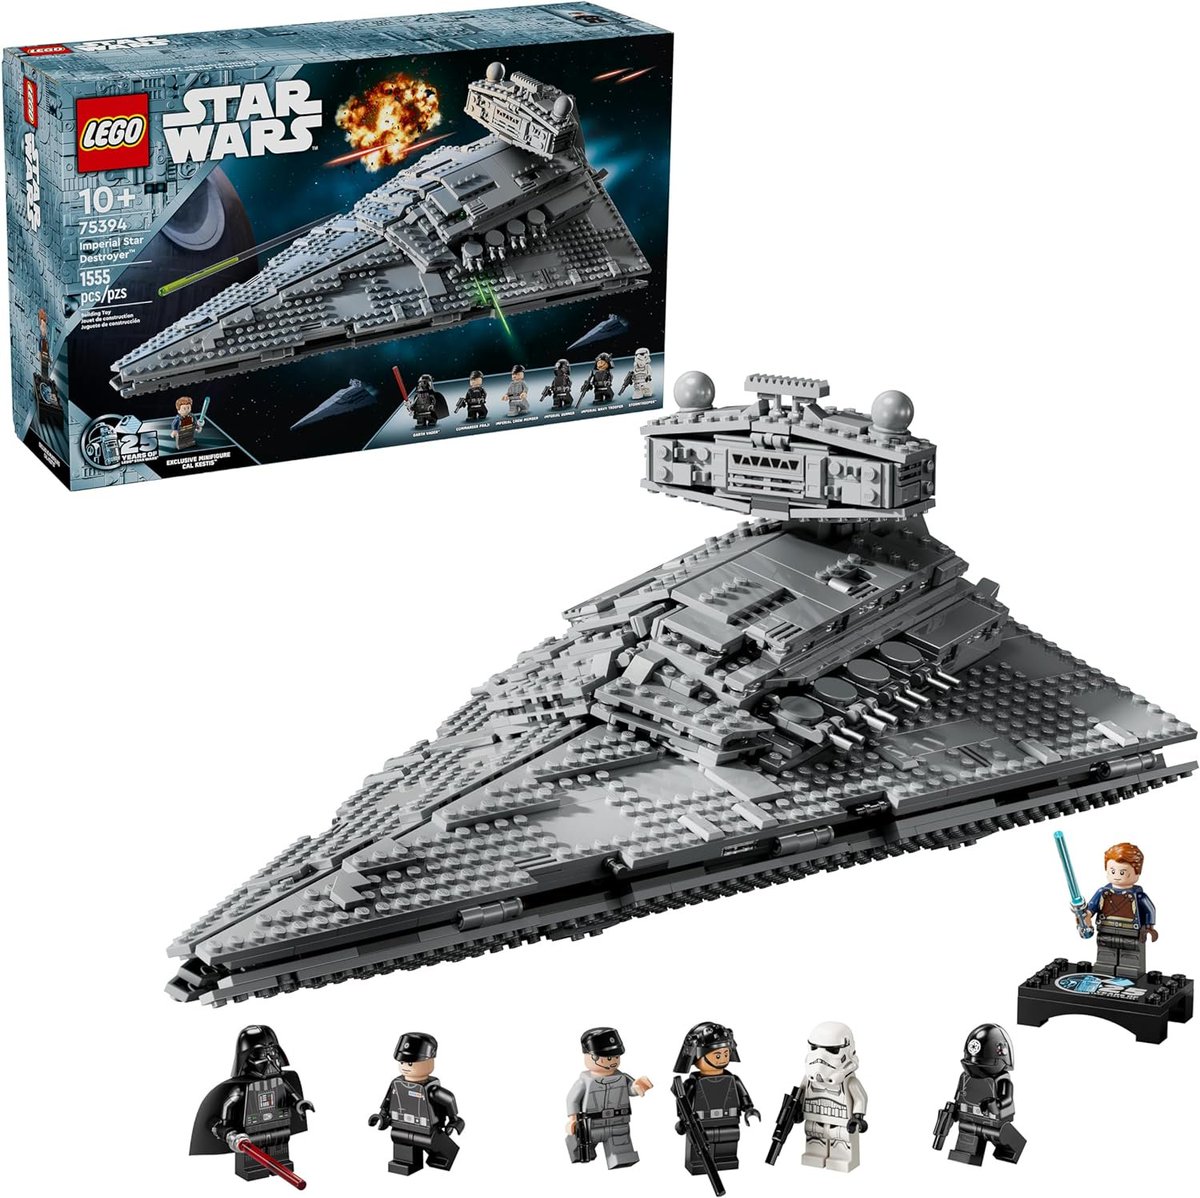 Preorder Now: LEGO Star Wars Imperial Star Destroyer -with Exclusive 25th Anniversary Cal Kestis Minifigure - Buildable Starship Set on Amazon. 

Link: amzn.to/3QVmRNJ

#Ad #LEGO #StarWars #RevengeOfThe5th #Maythe4thBeWithYou #MayTheFourthBeWithYou